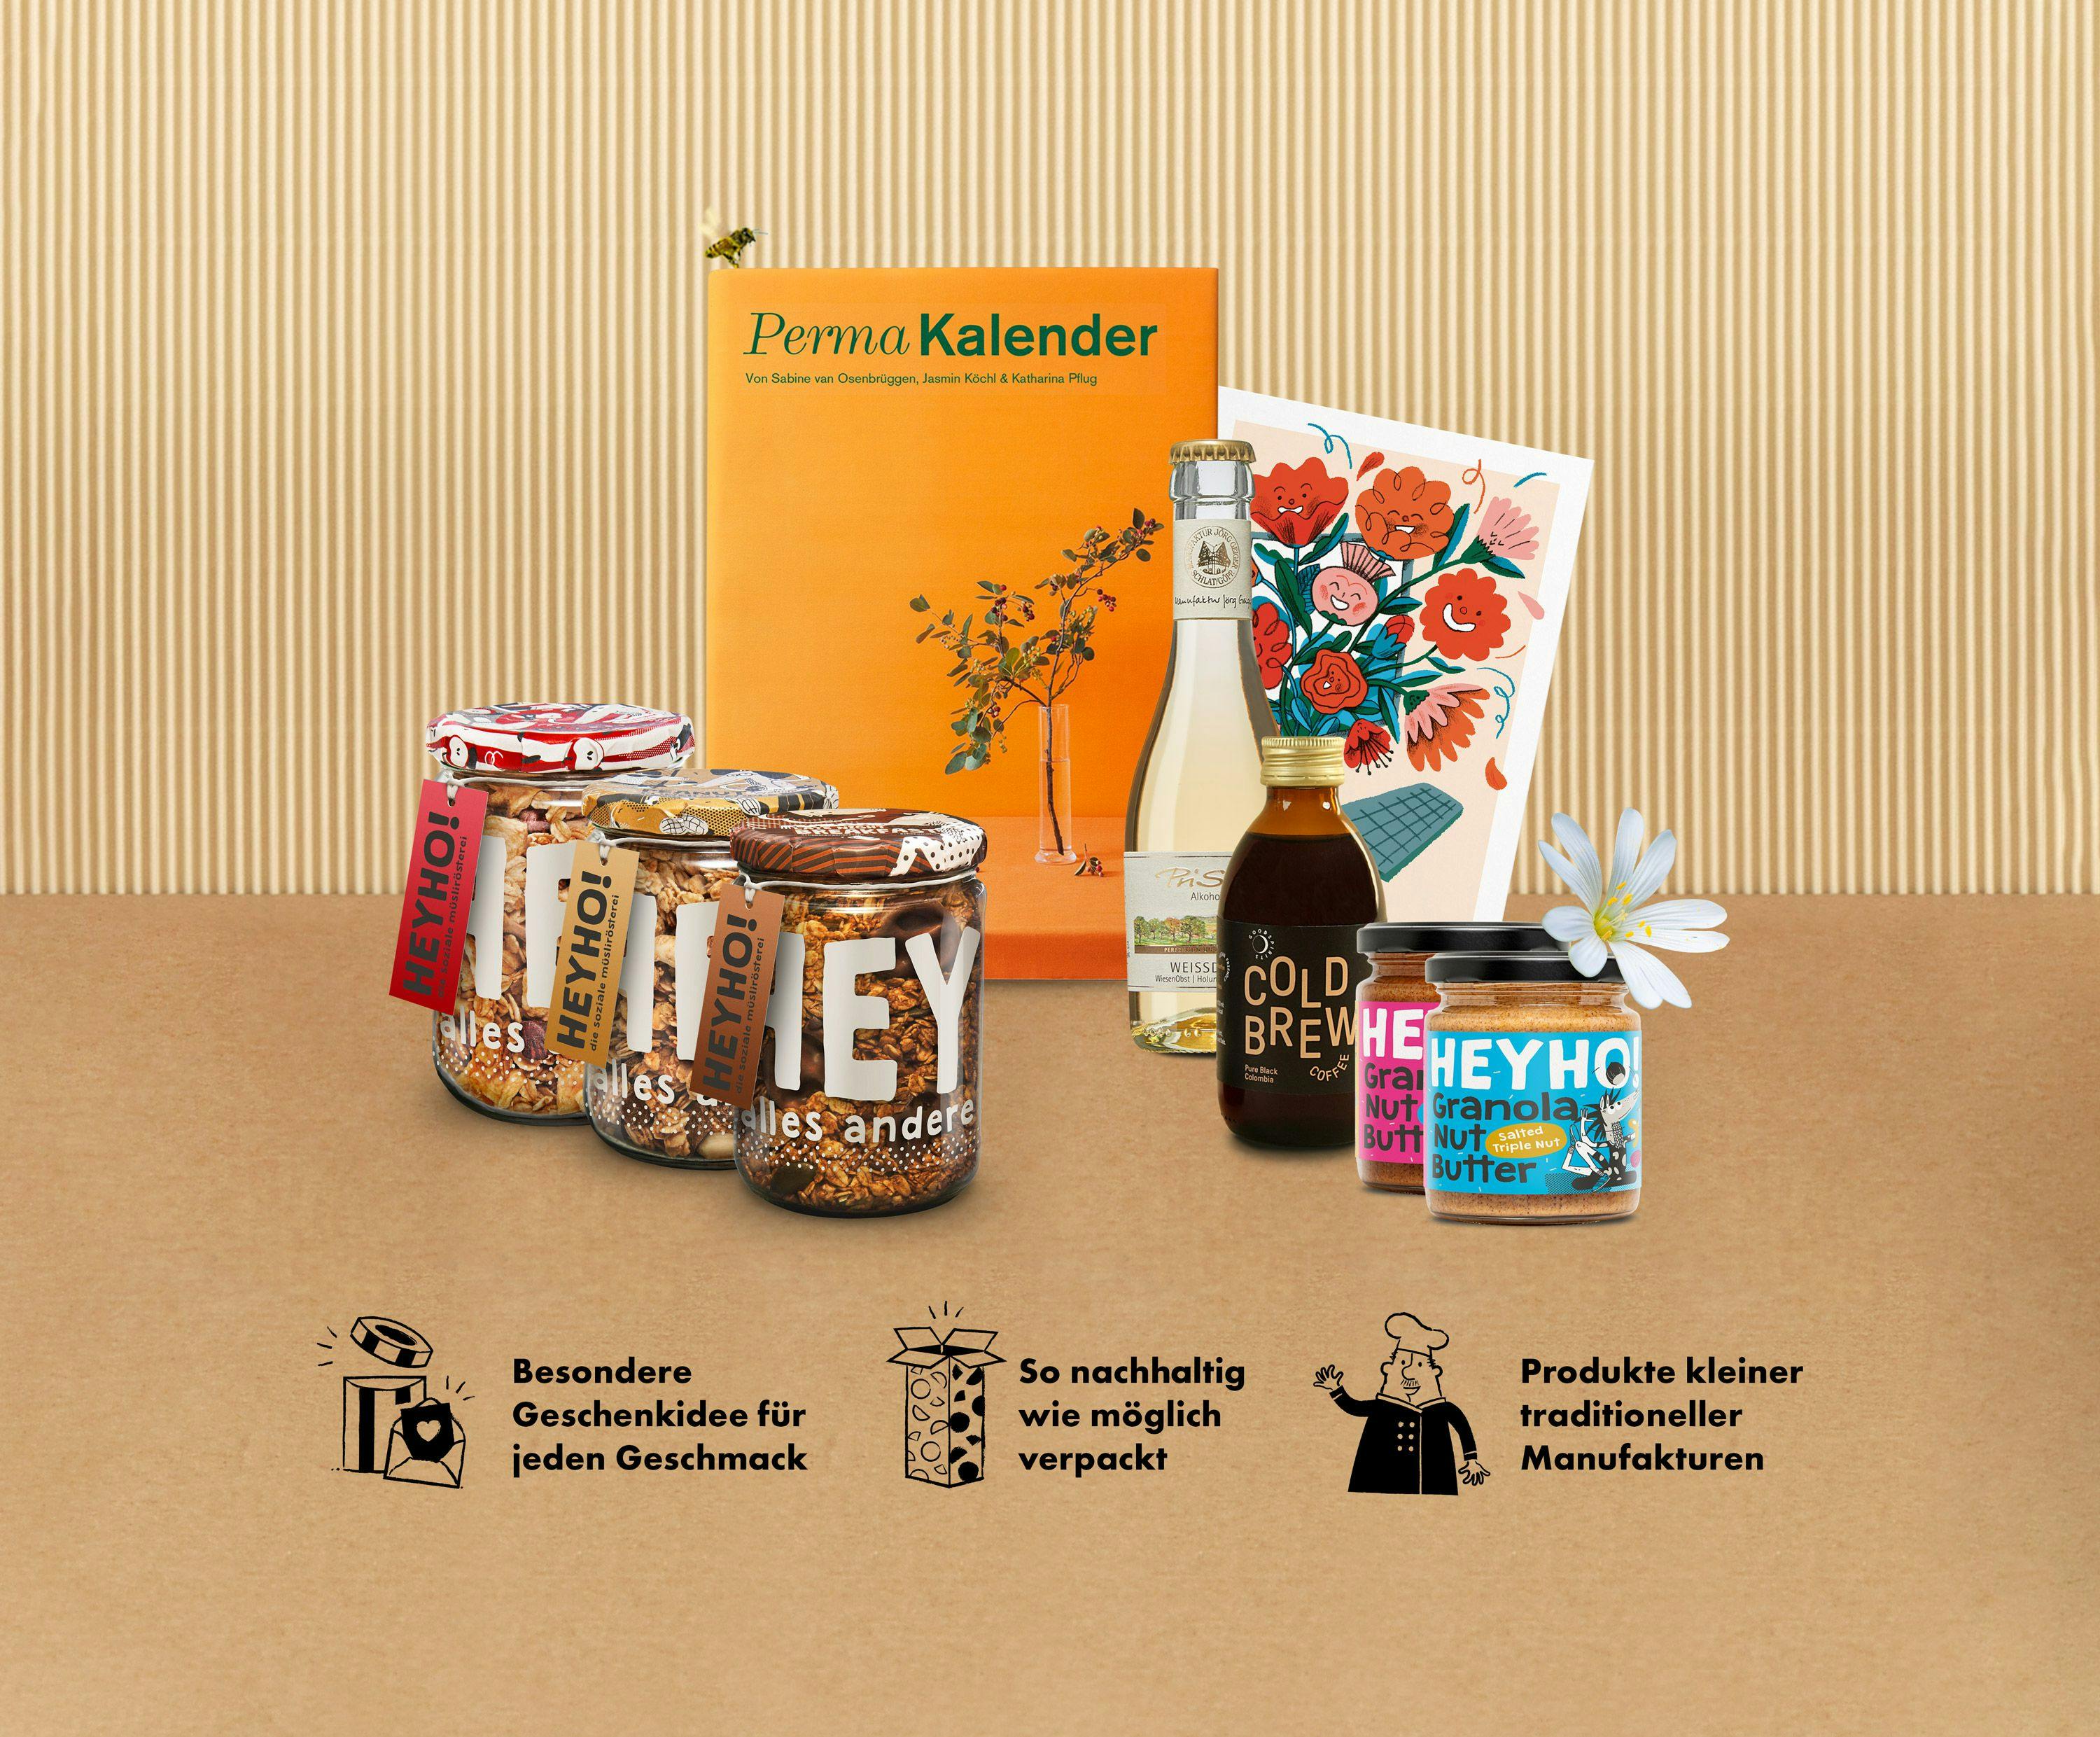 Sustainable gift ideas - Elisenlebkuchen from the food startup Pfeffer & Frost.